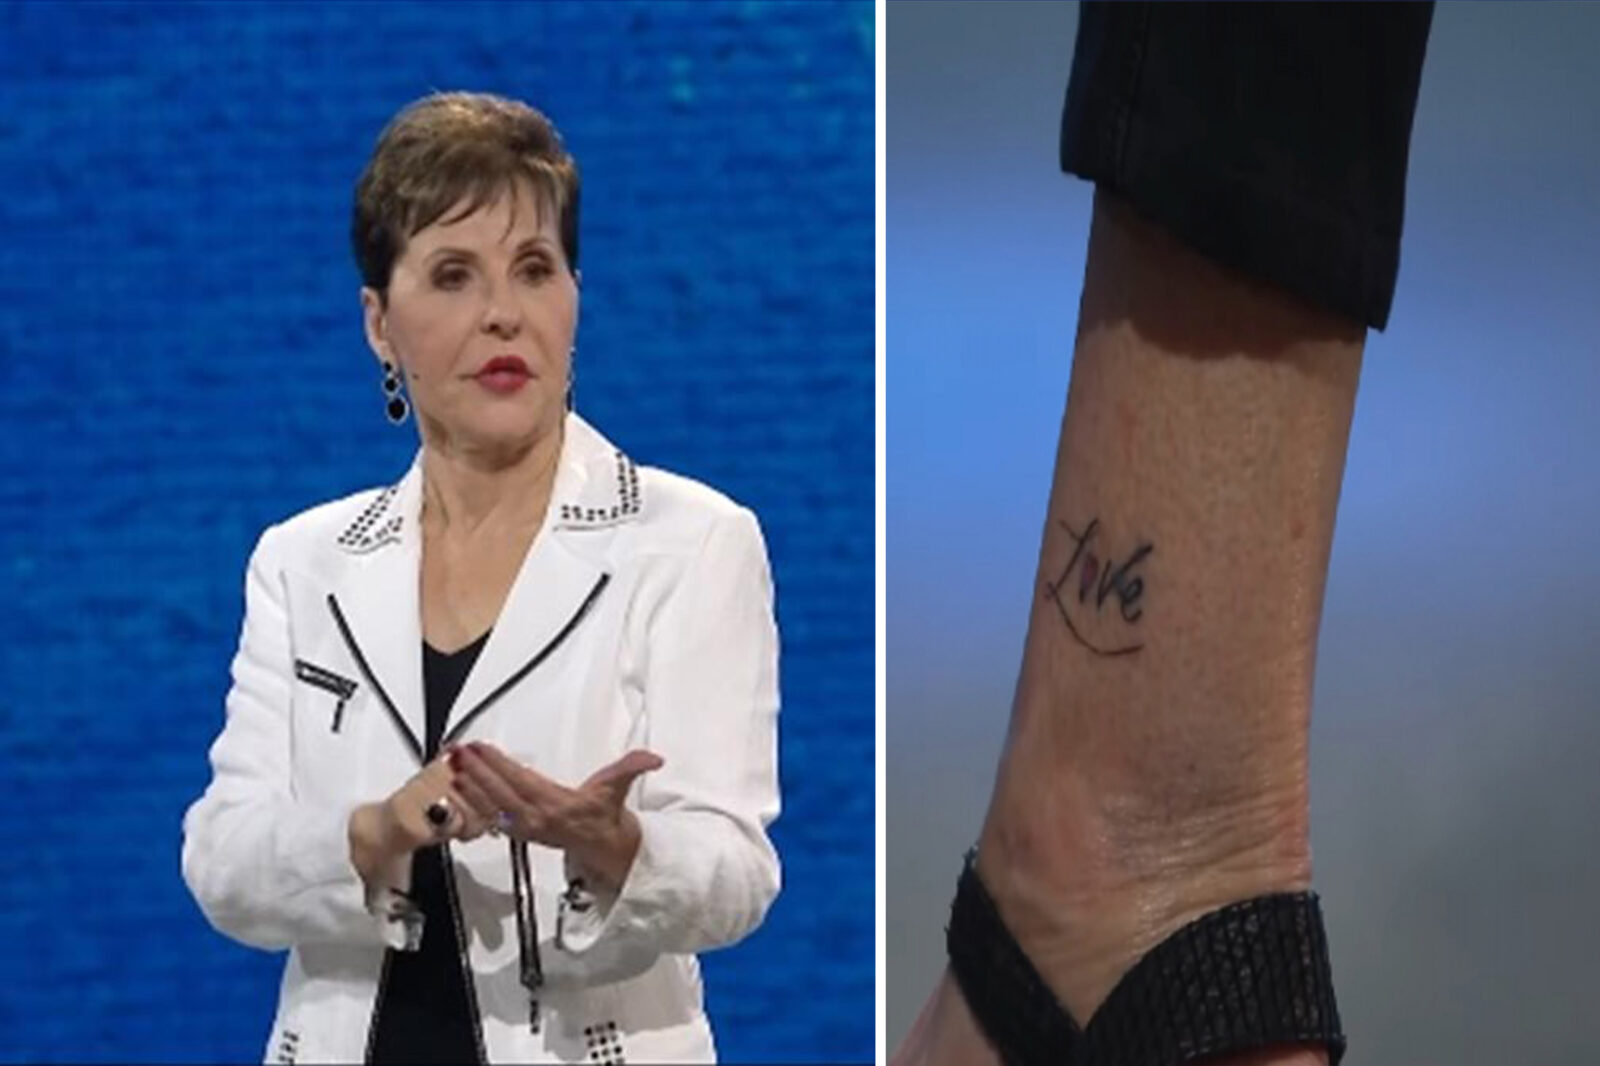 Joyce Meyer, 79, Just Got Two Tattoos to 'Honor God' - RELEVANT